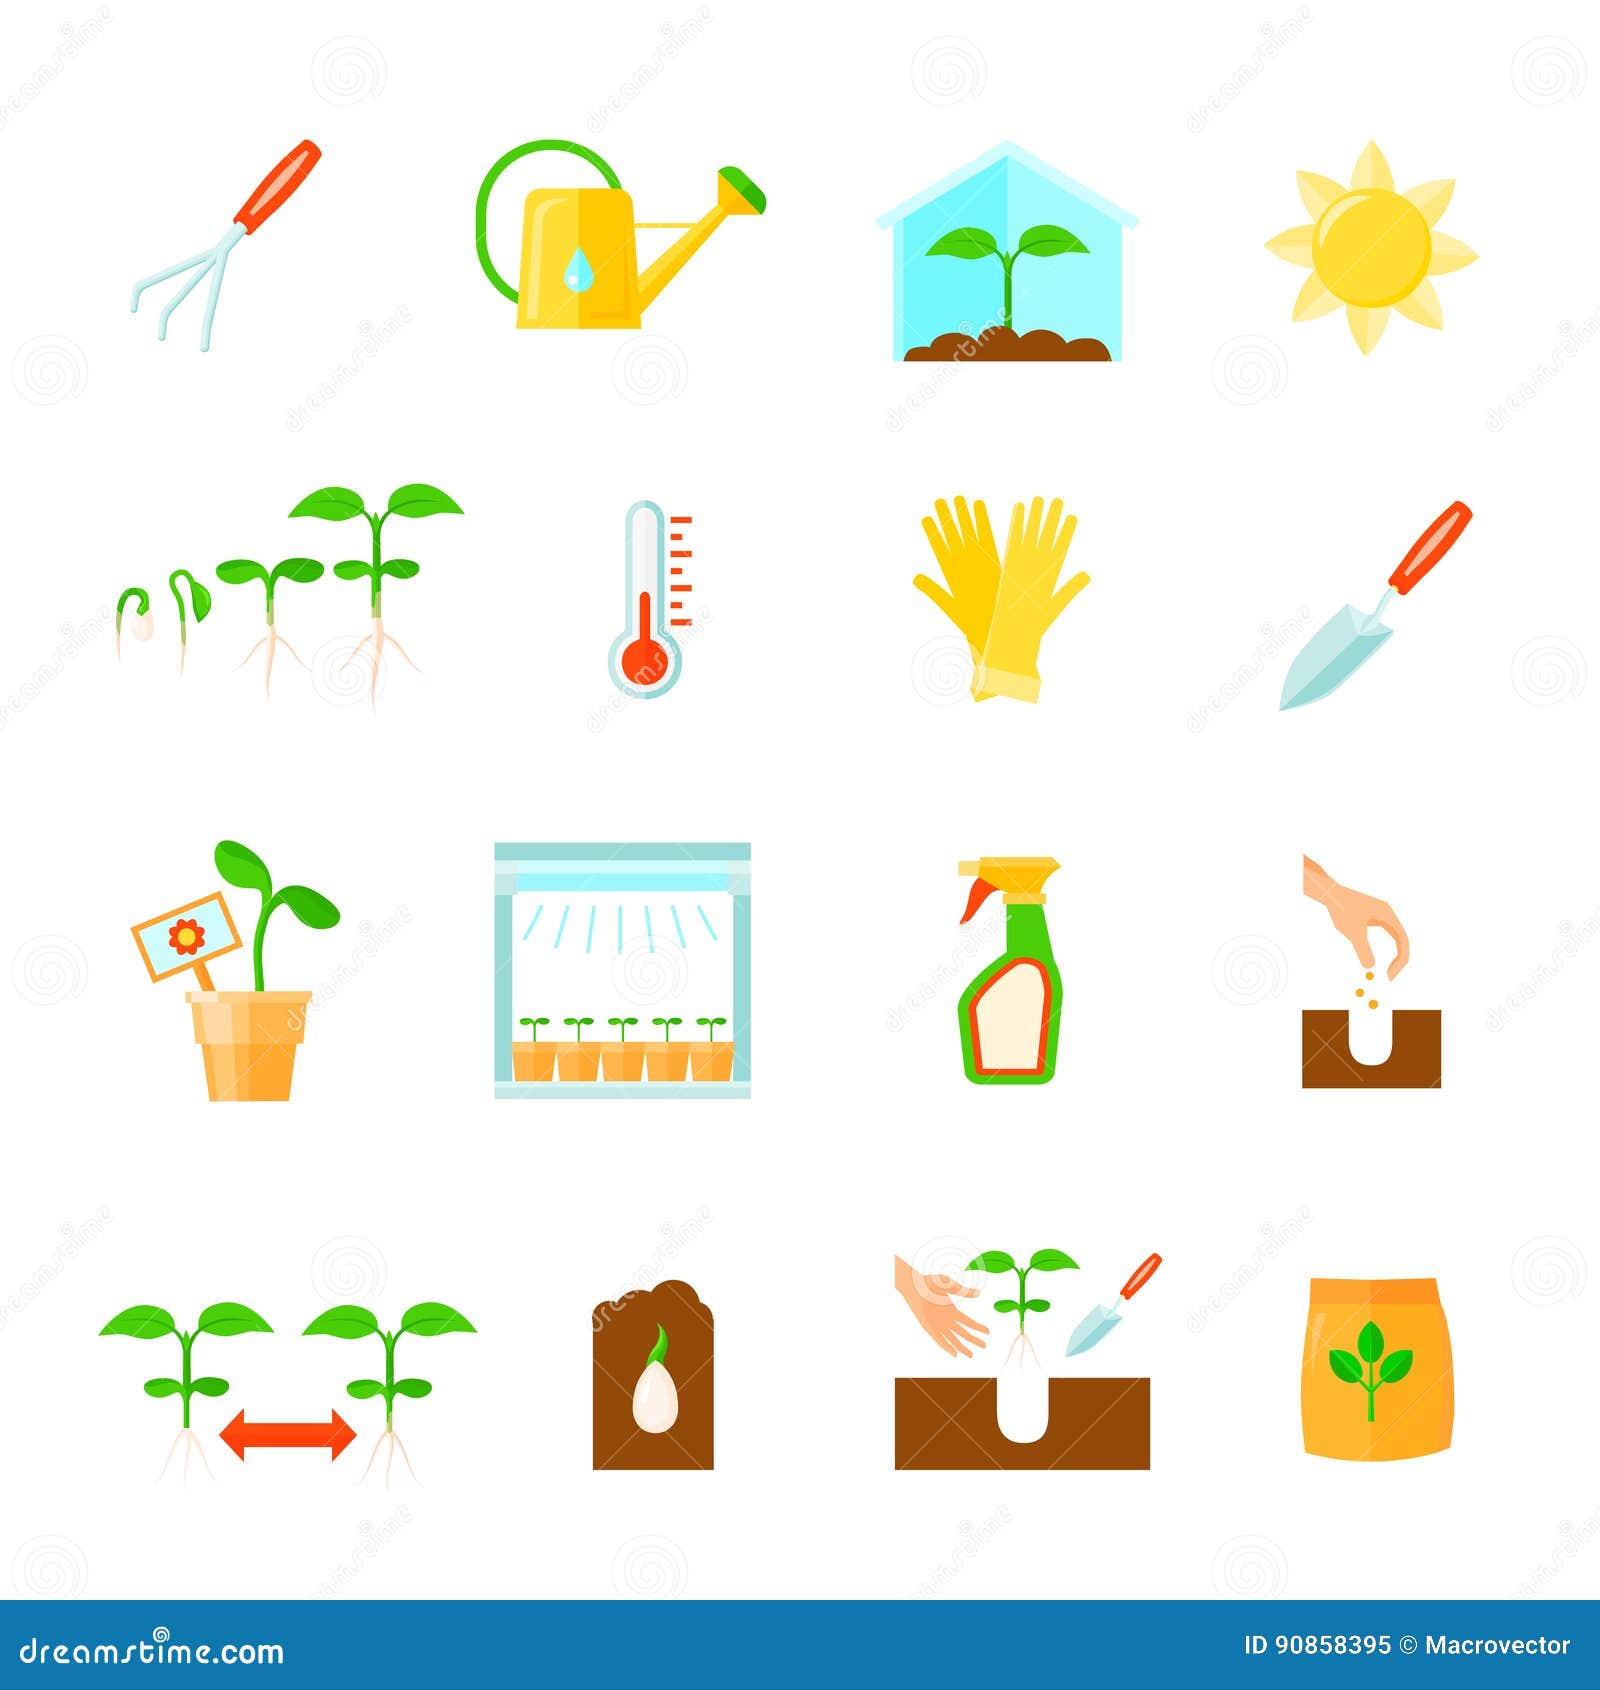 Seedling Icons Set stock vector. Illustration of icons - 90858395